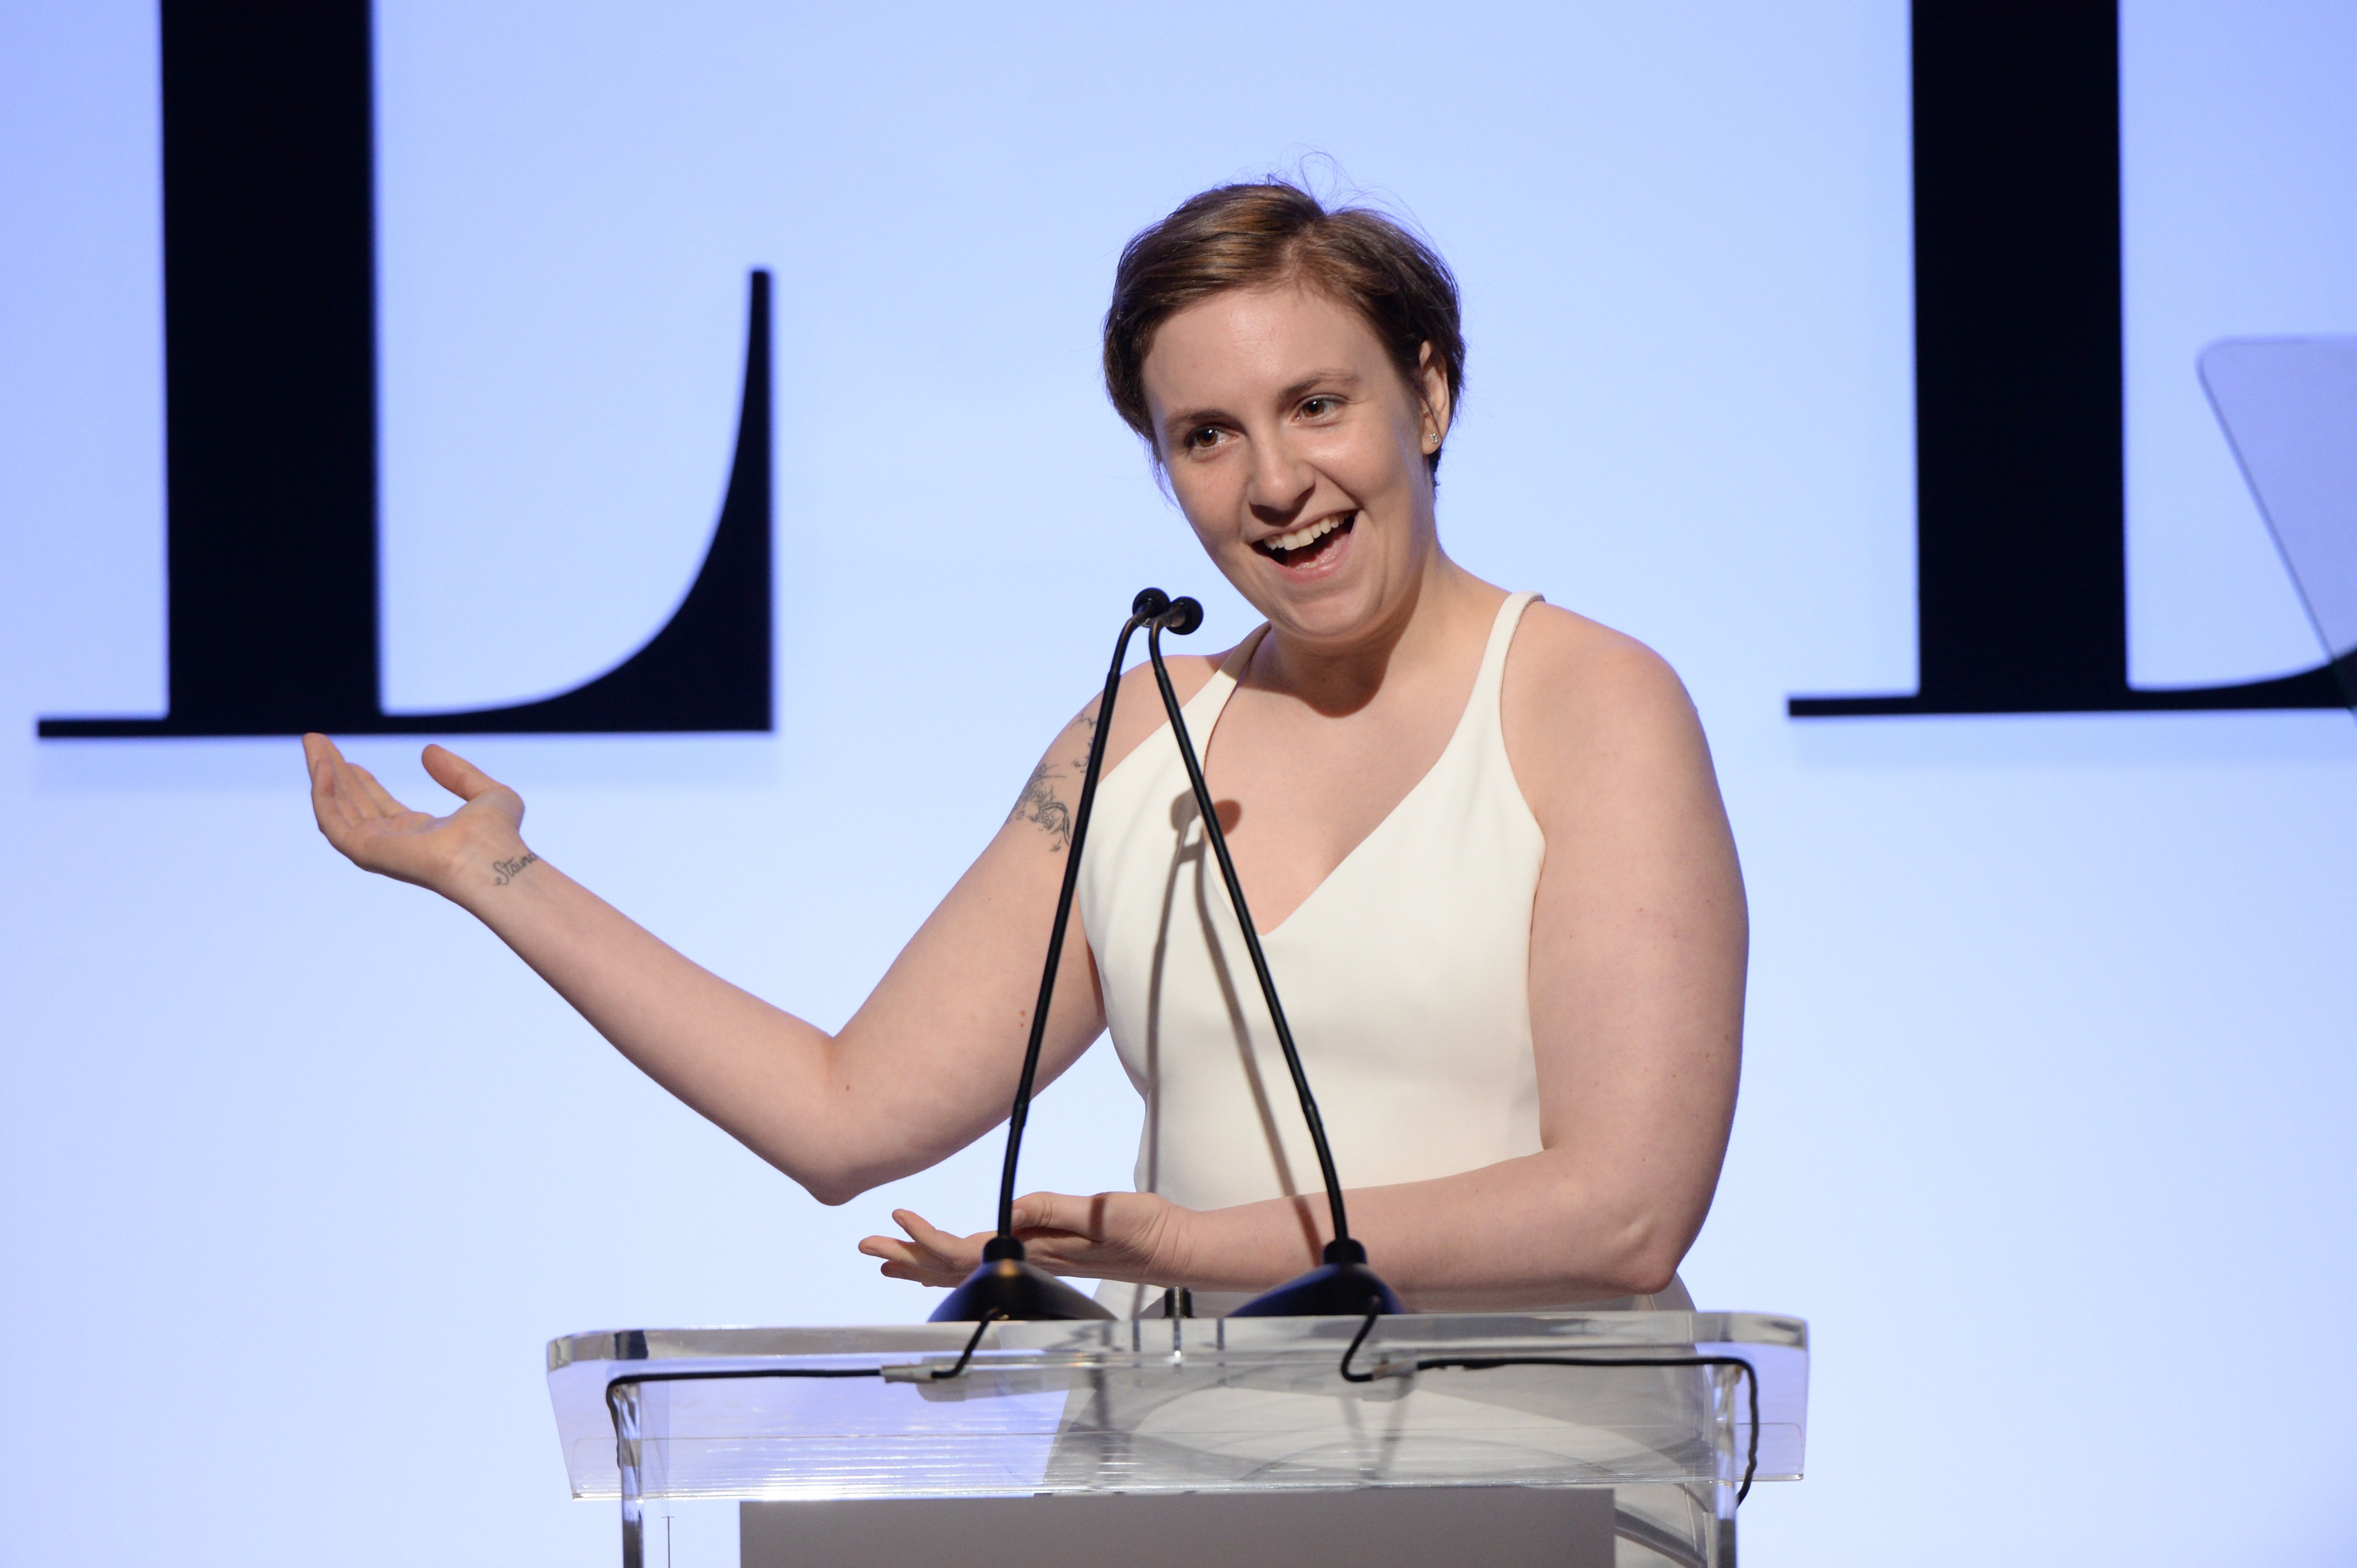 Actress Lena Dunham speaks onstage during the 22nd Annual ELLE Women in Hollywood Awards presented by Calvin Klein Collection, L’Oréal Paris, and David Yurman at the Four Seasons Los Angeles at Beverly Hills on October 19, 2015 in Beverly Hills, Calif. (Michael Kovac/Getty Images)